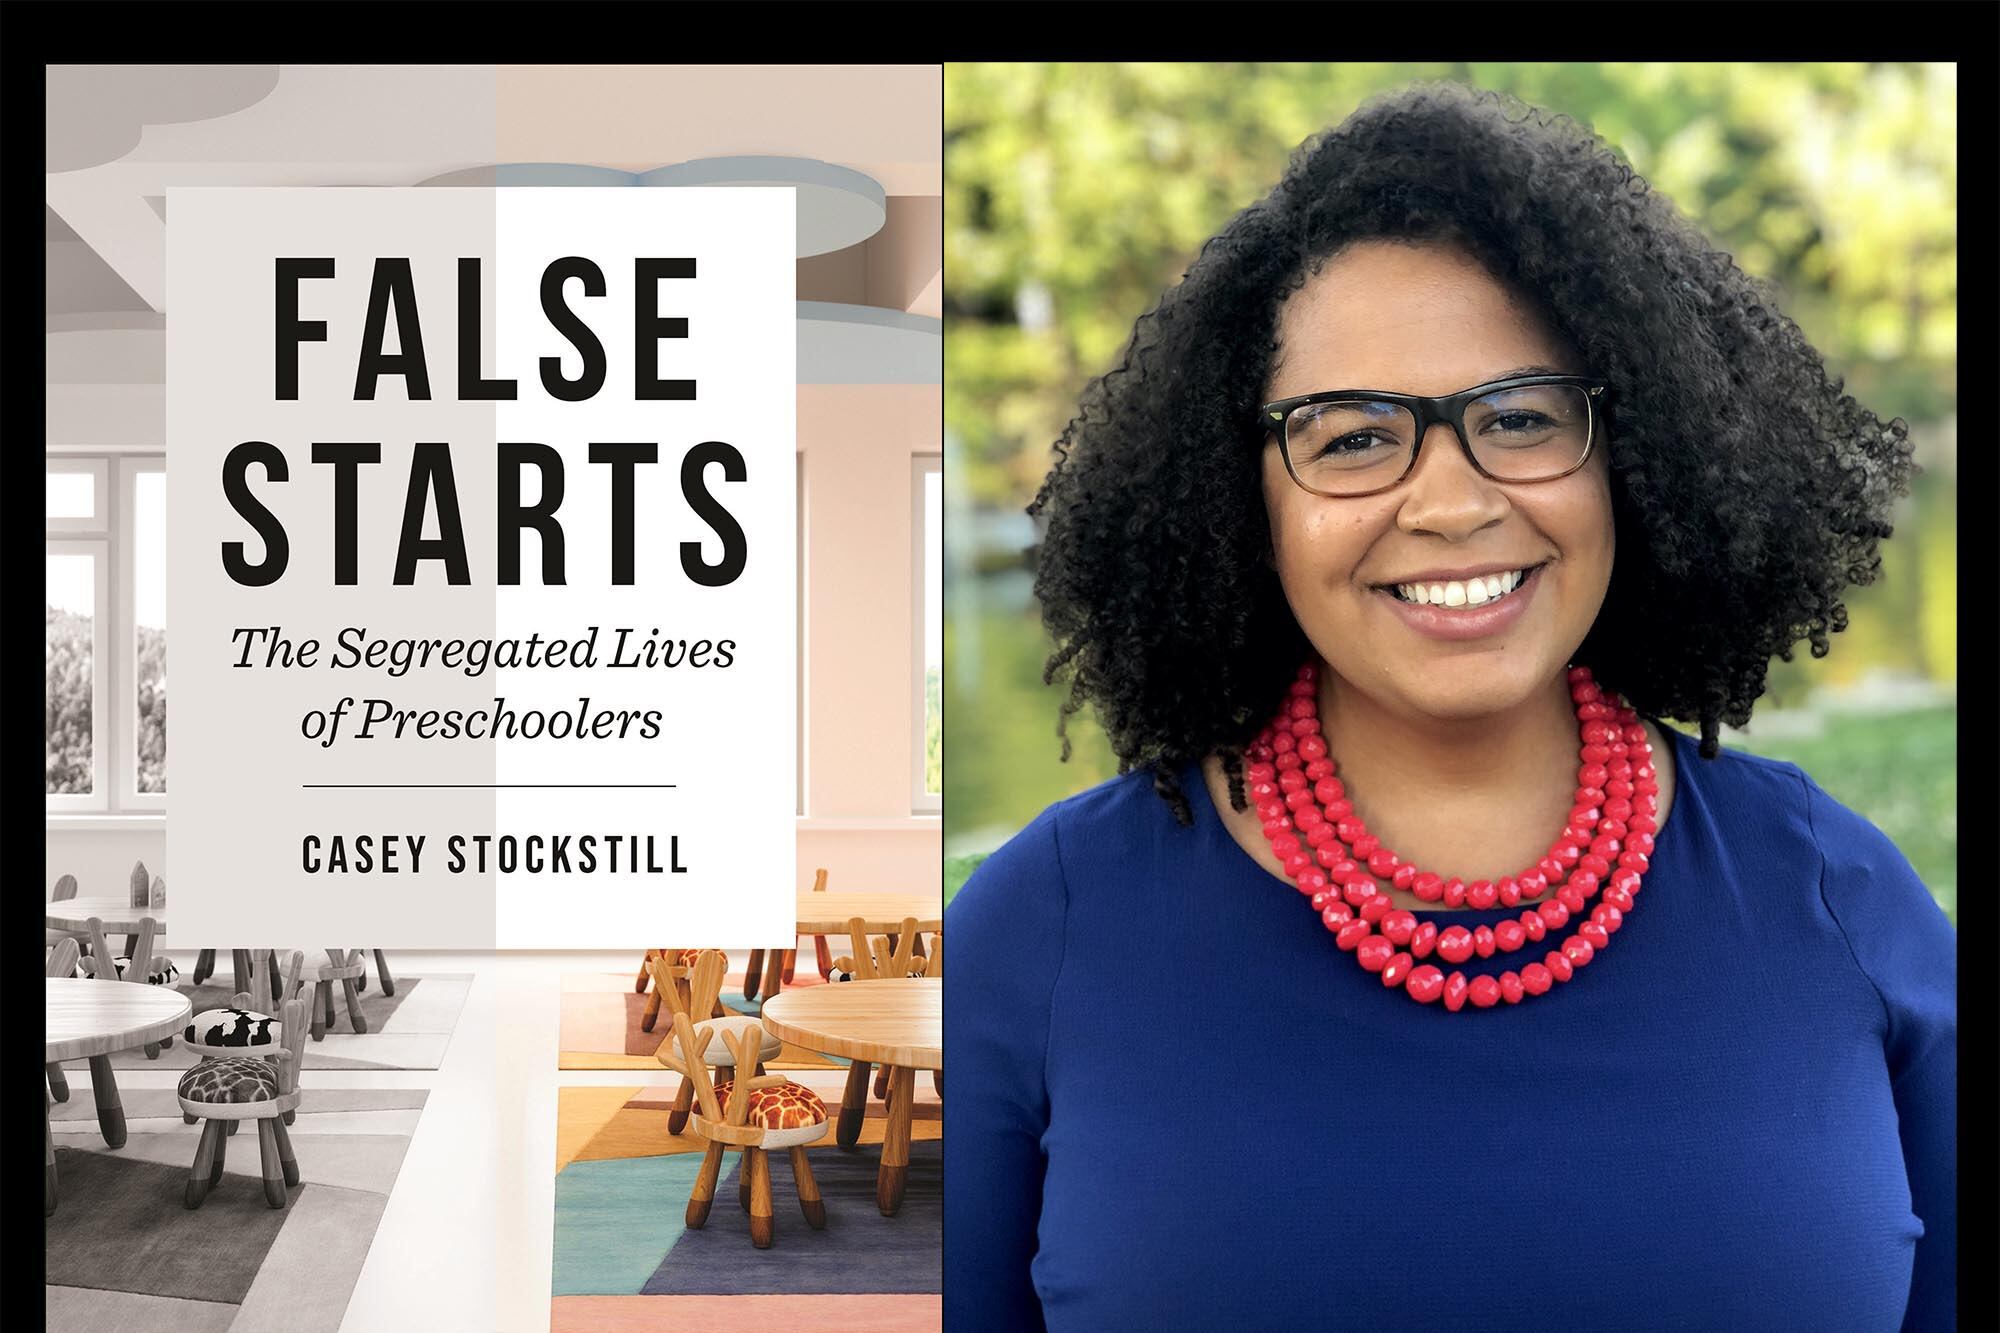 A diptych showing a book cover on the left with large black letters saying "False Starts The Segregated Lives of Preschoolers Casey Stockstill." On the right, a woman with black hair smiles for a portrait while wearing a blue shirt and a large red necklace.